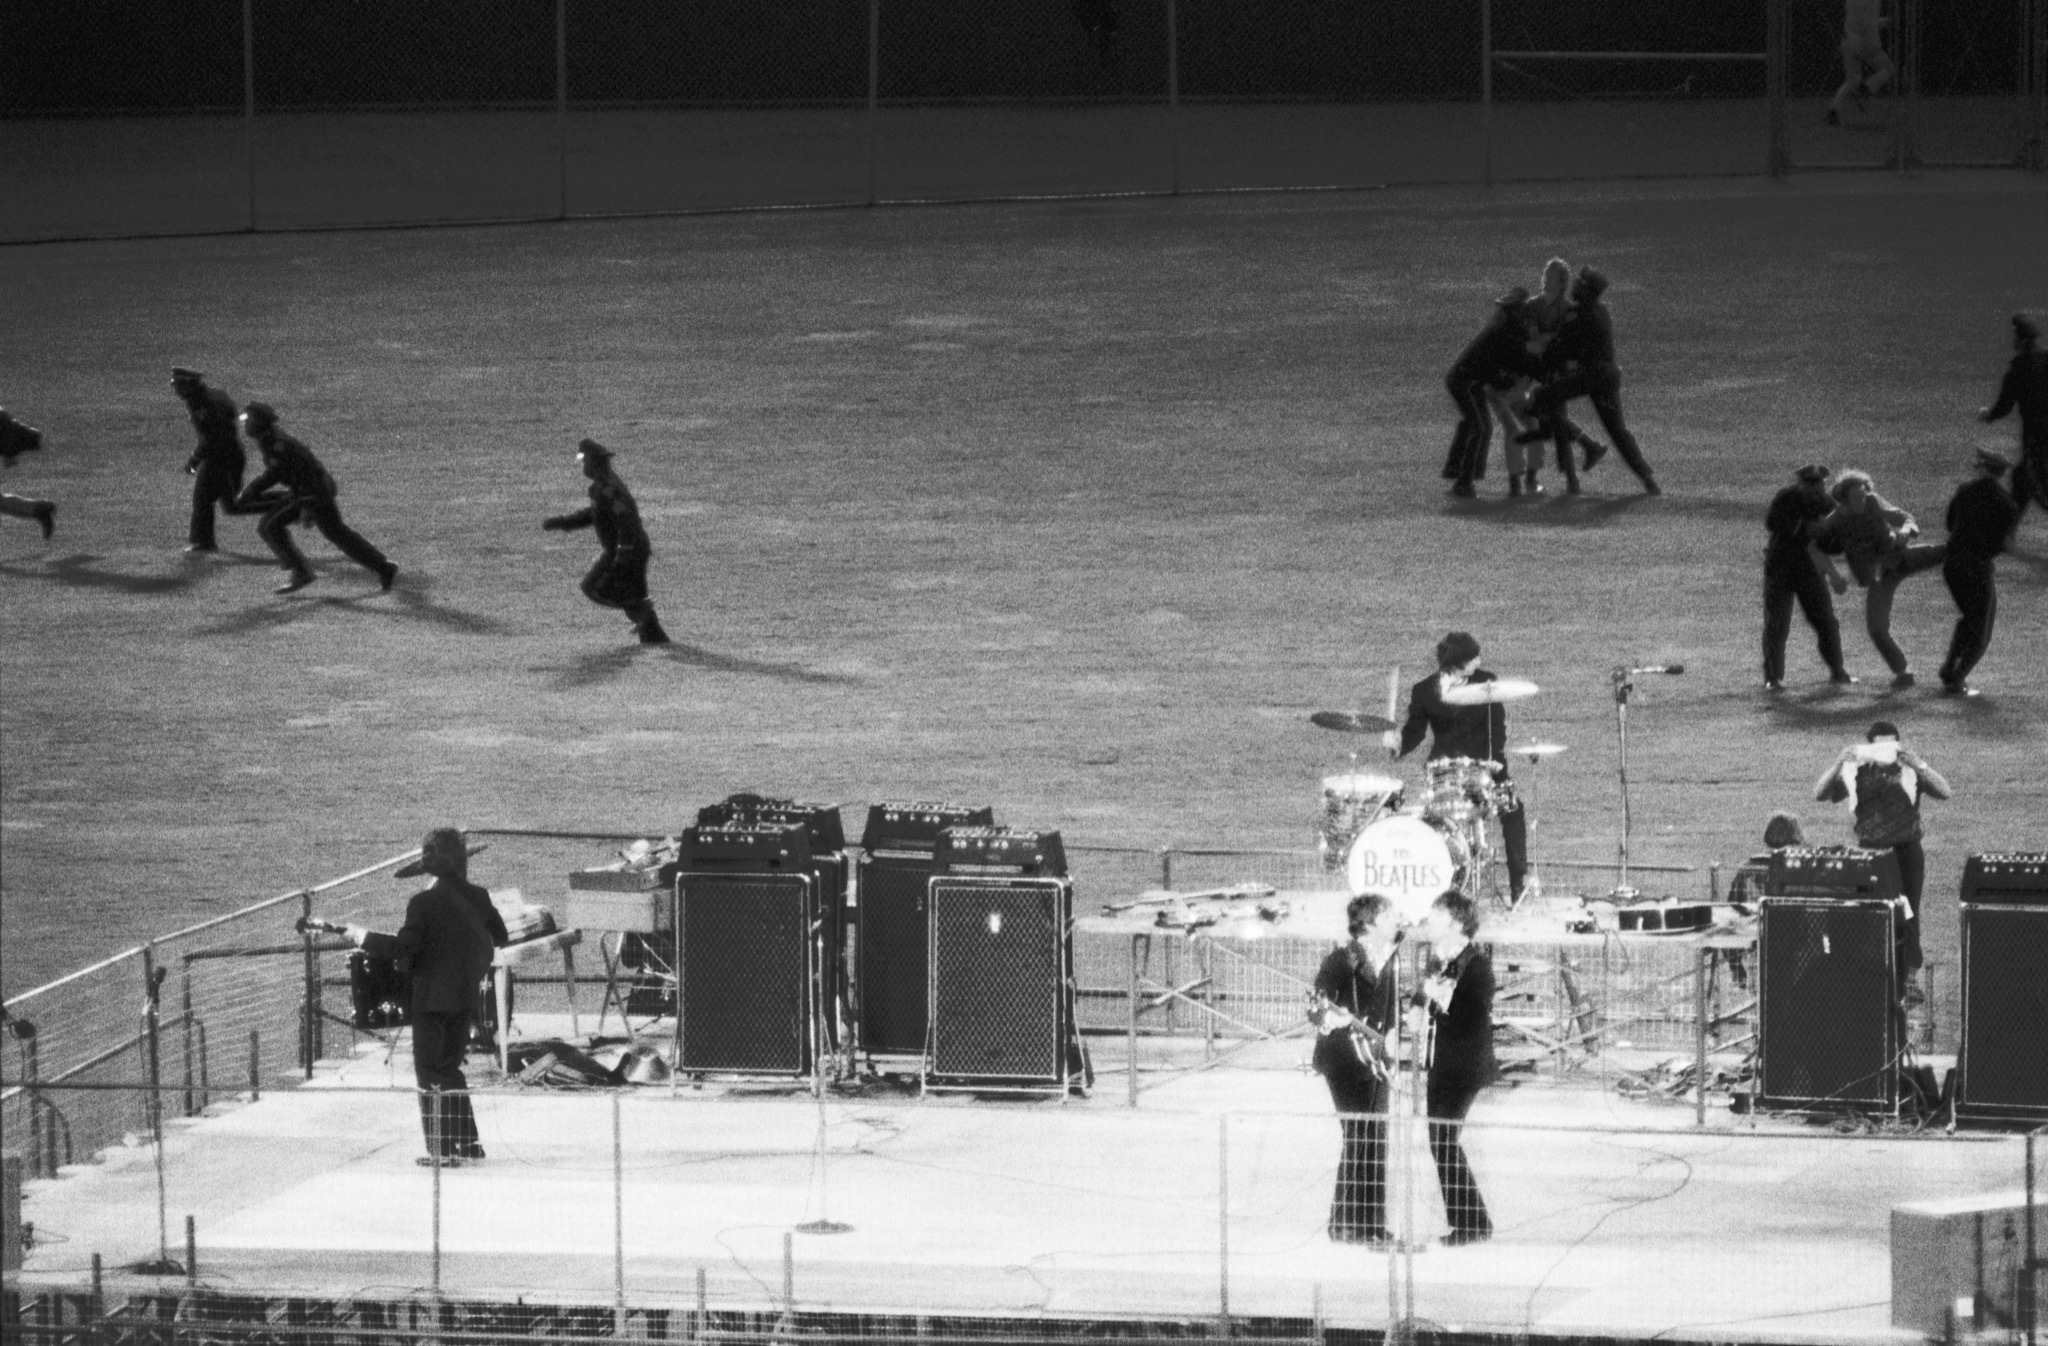 The story of the Beatles' last official concert, which took place 